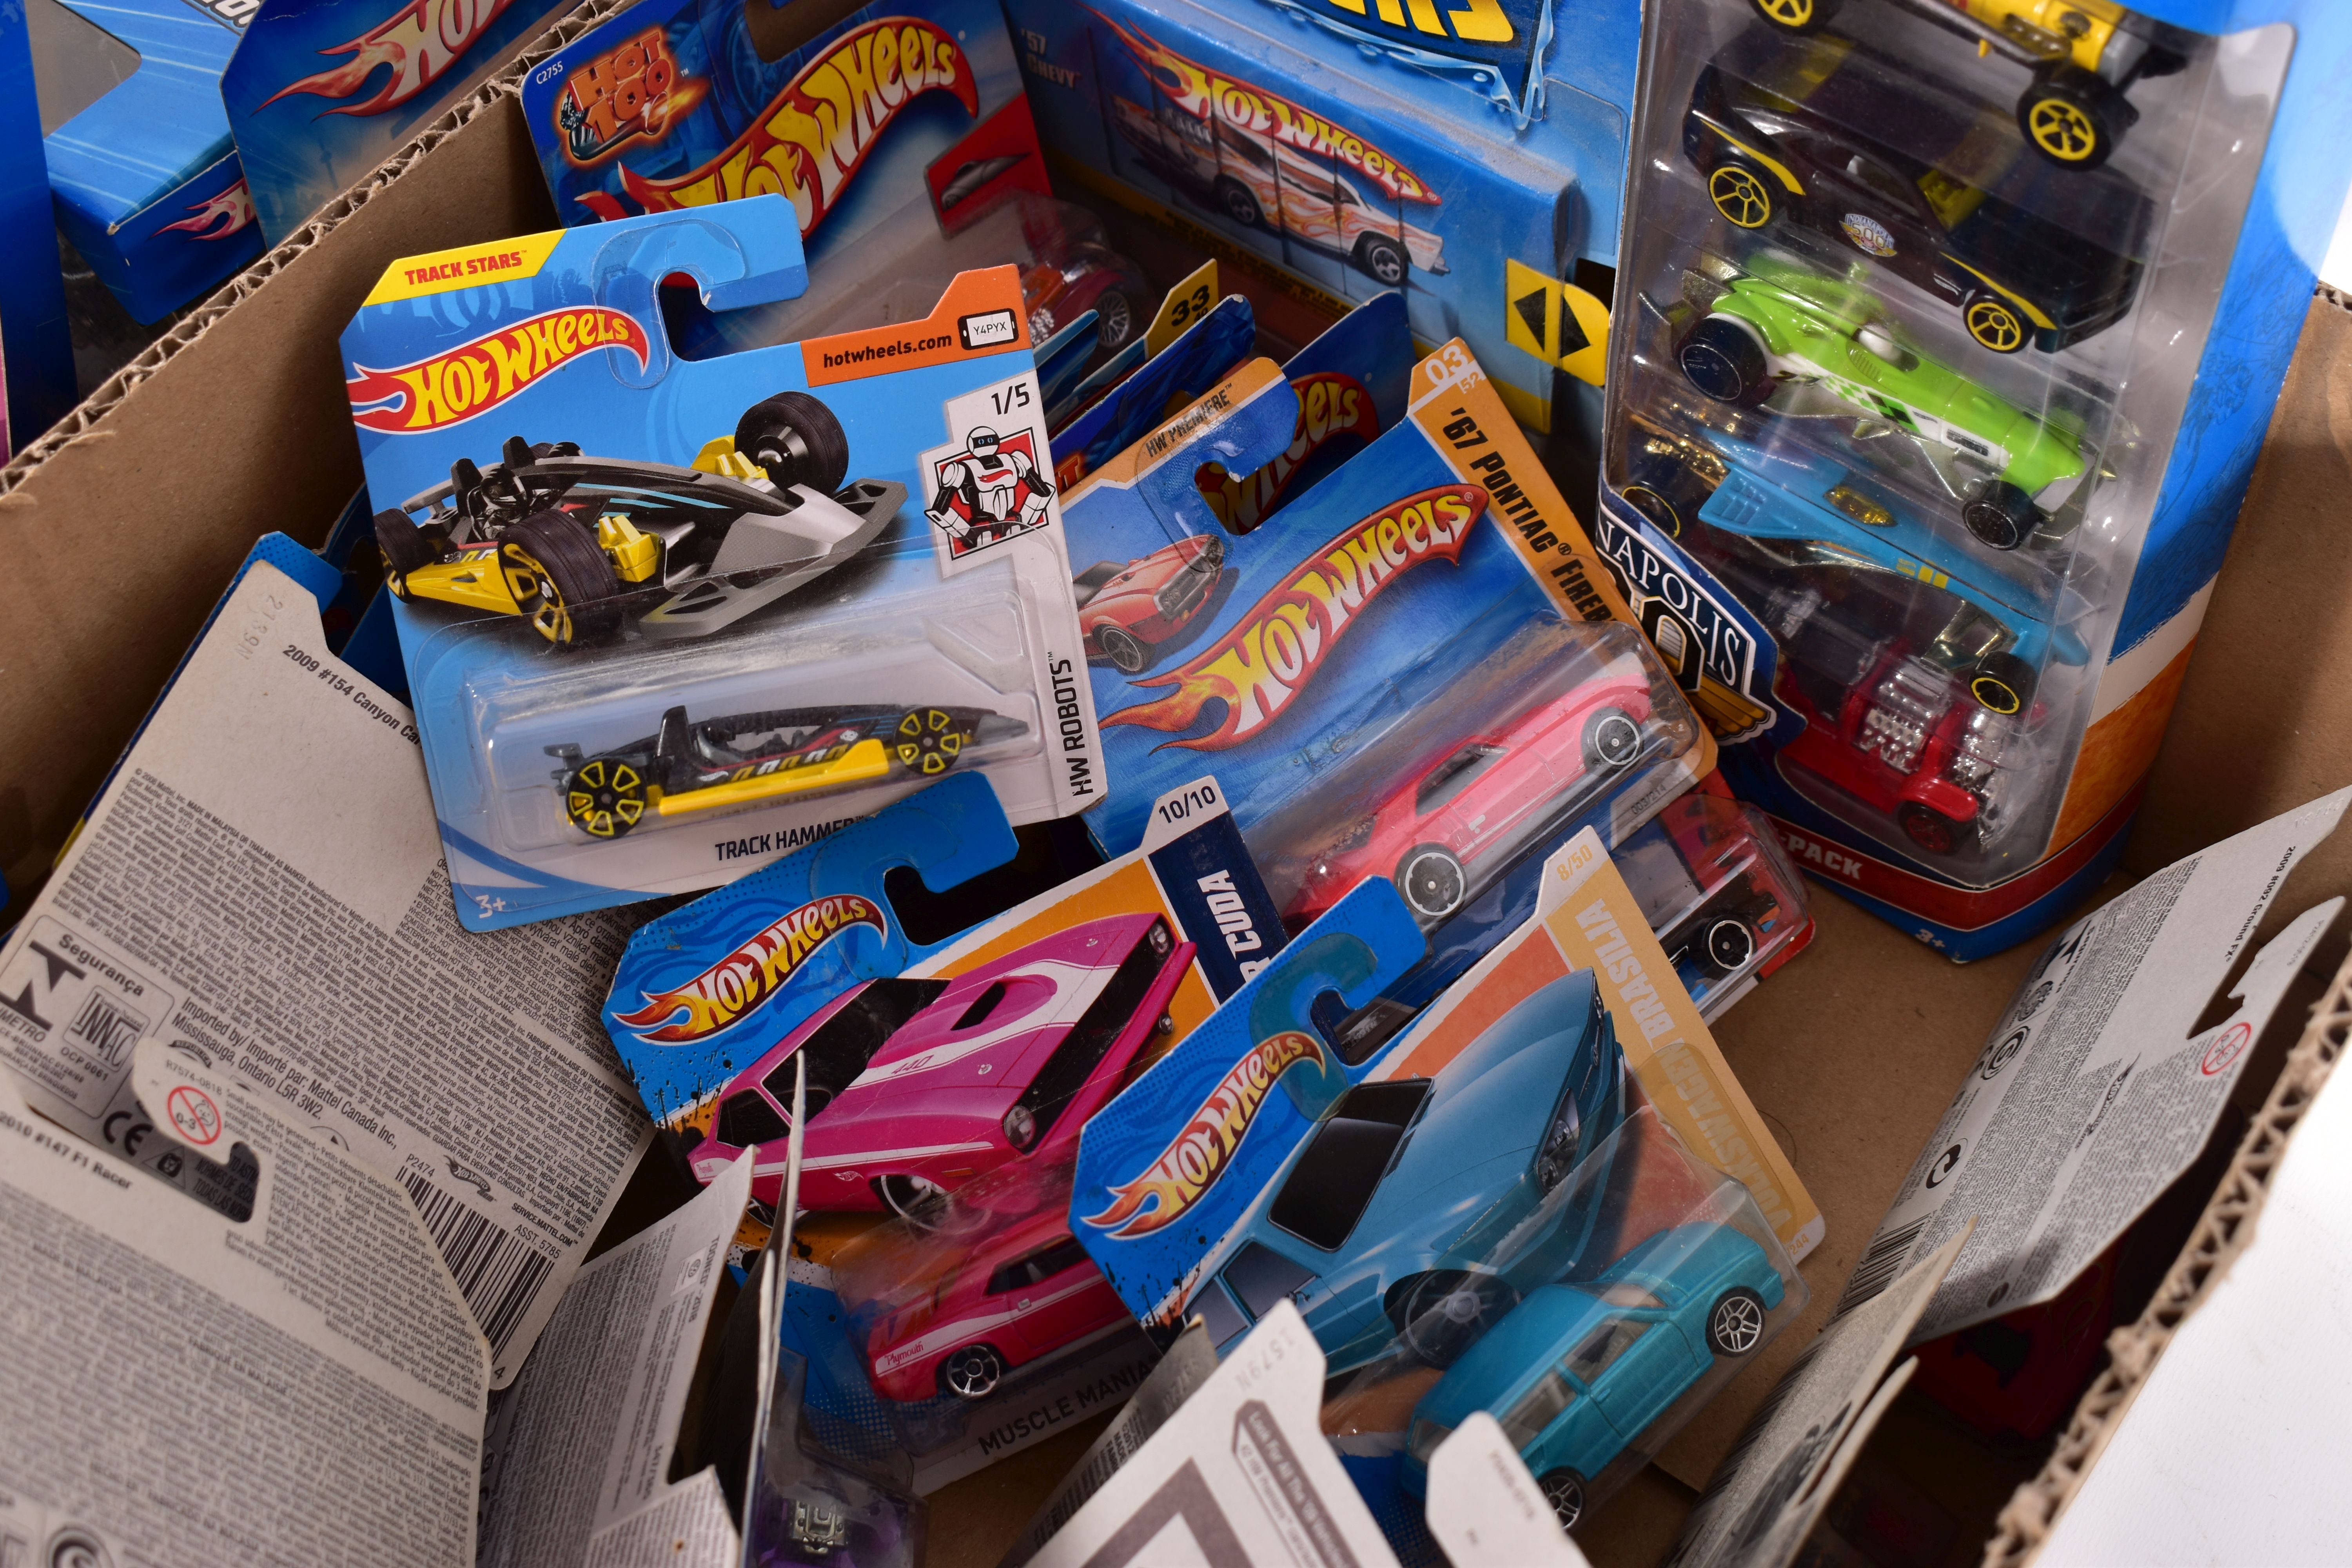 A QUANTITY OF ASSORTED MODERN MATTEL HOT WHEELS VEHICLES, all still sealed in original bubble packs, - Image 6 of 6